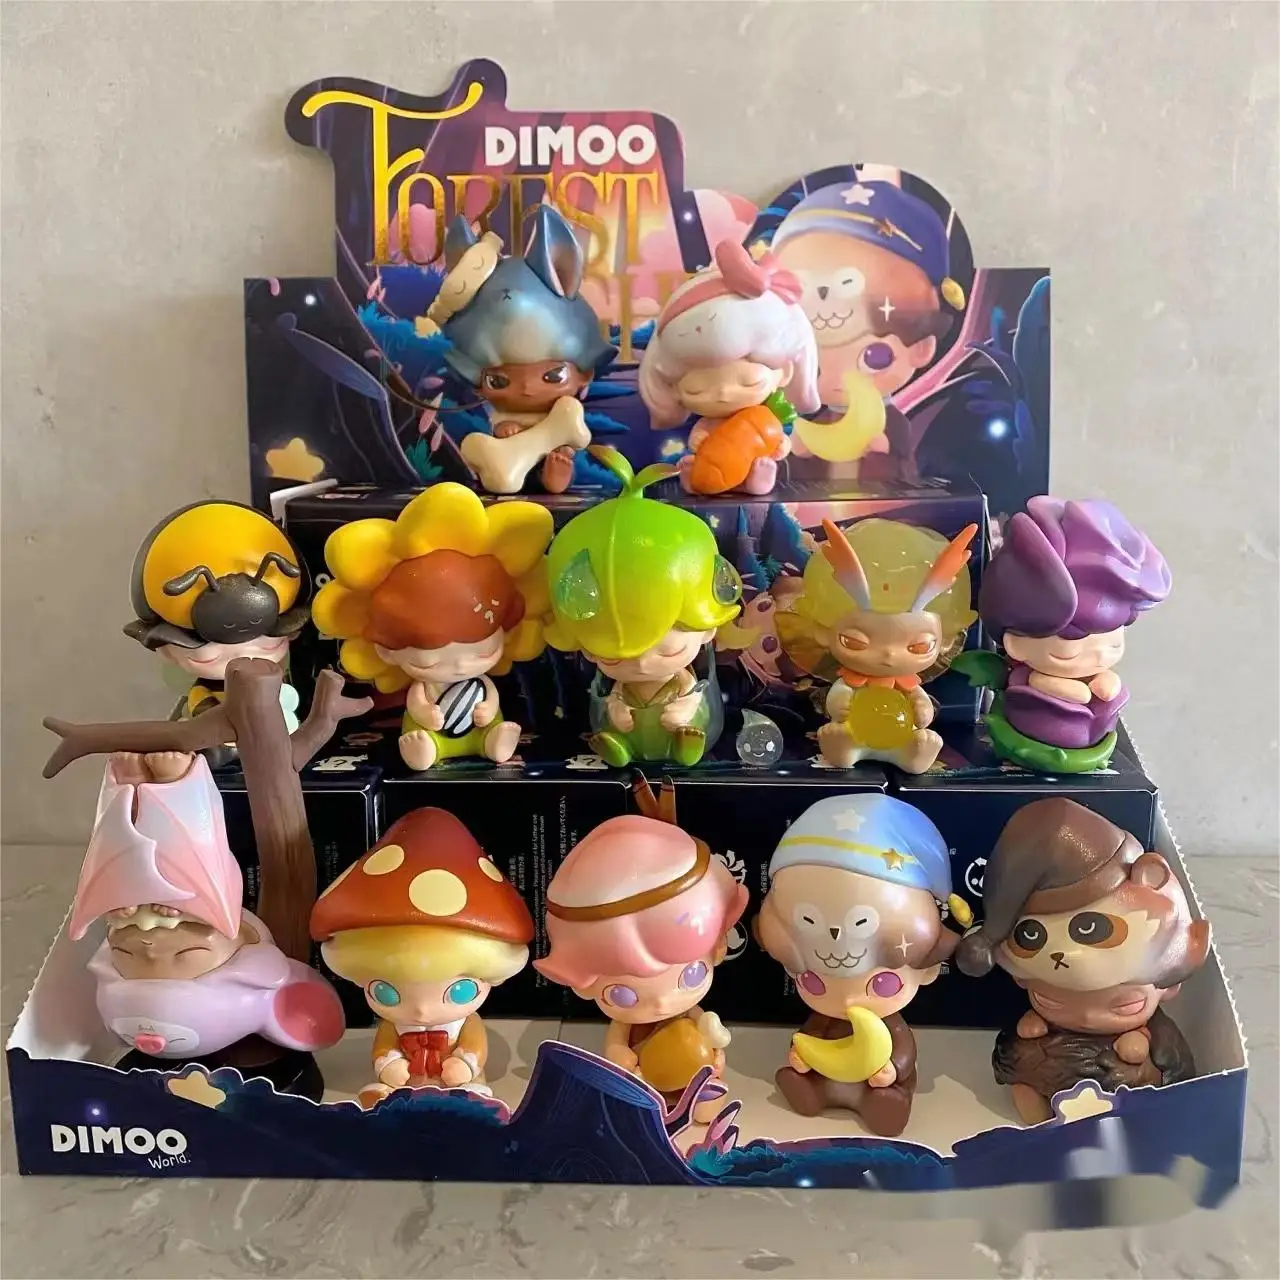 POP MART Whole Box Dimoo Forest Night Series Blind box Toys figure Action Figure Birthday Gift Kid Toy